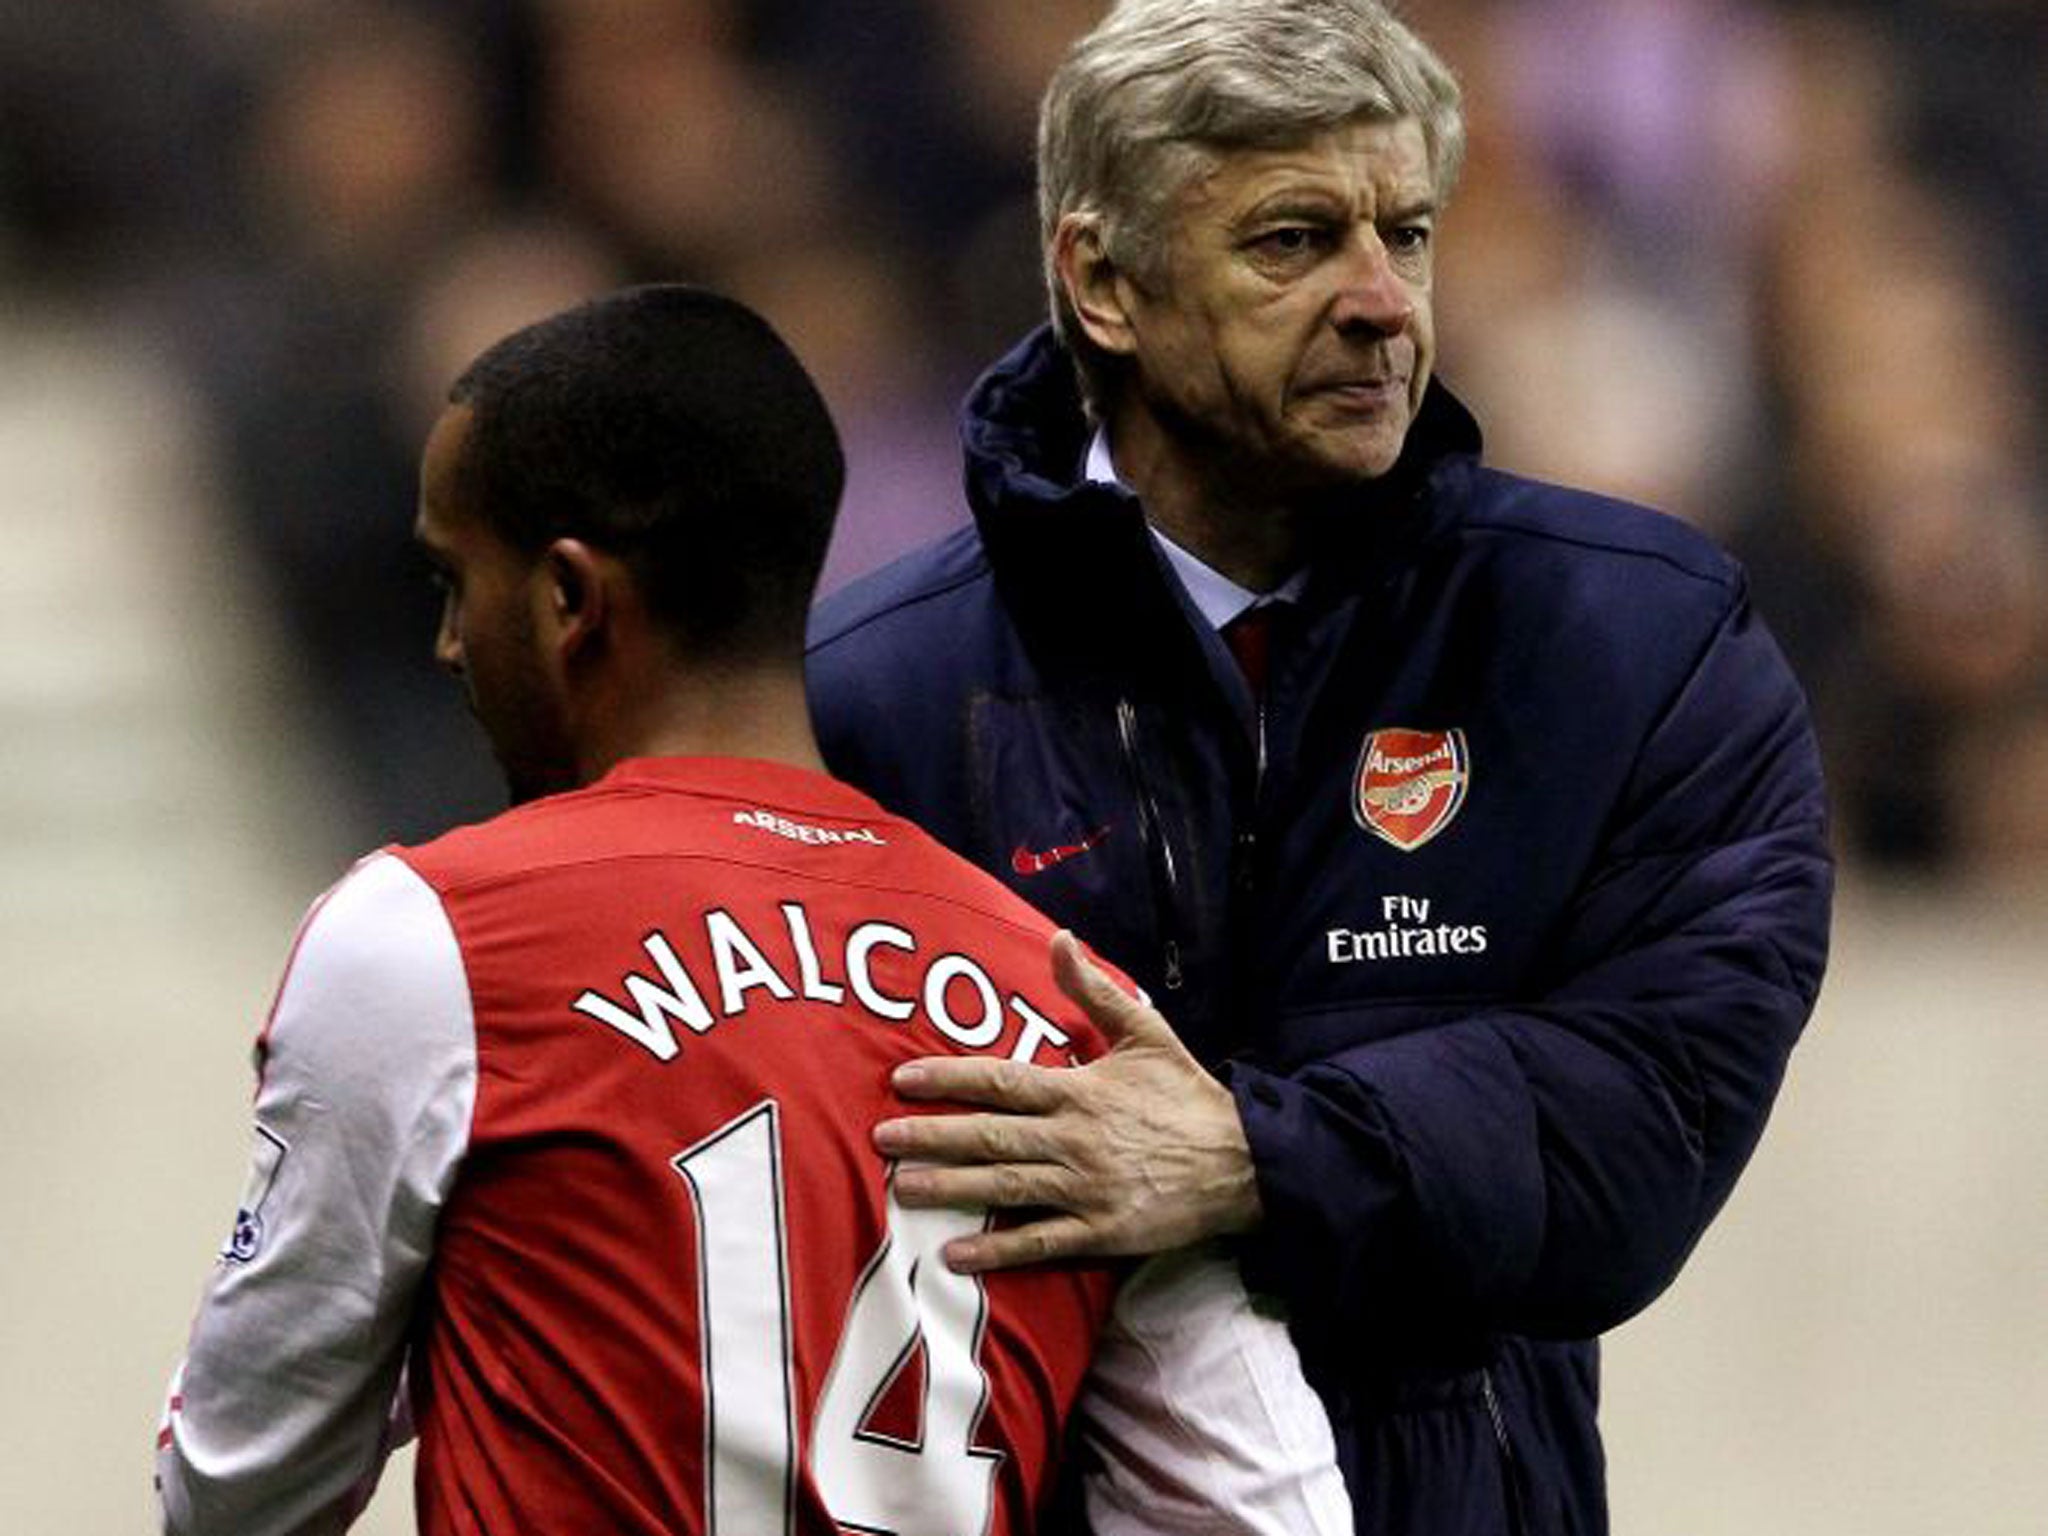 Wenger said that Theo Walcott will sign a new deal this month